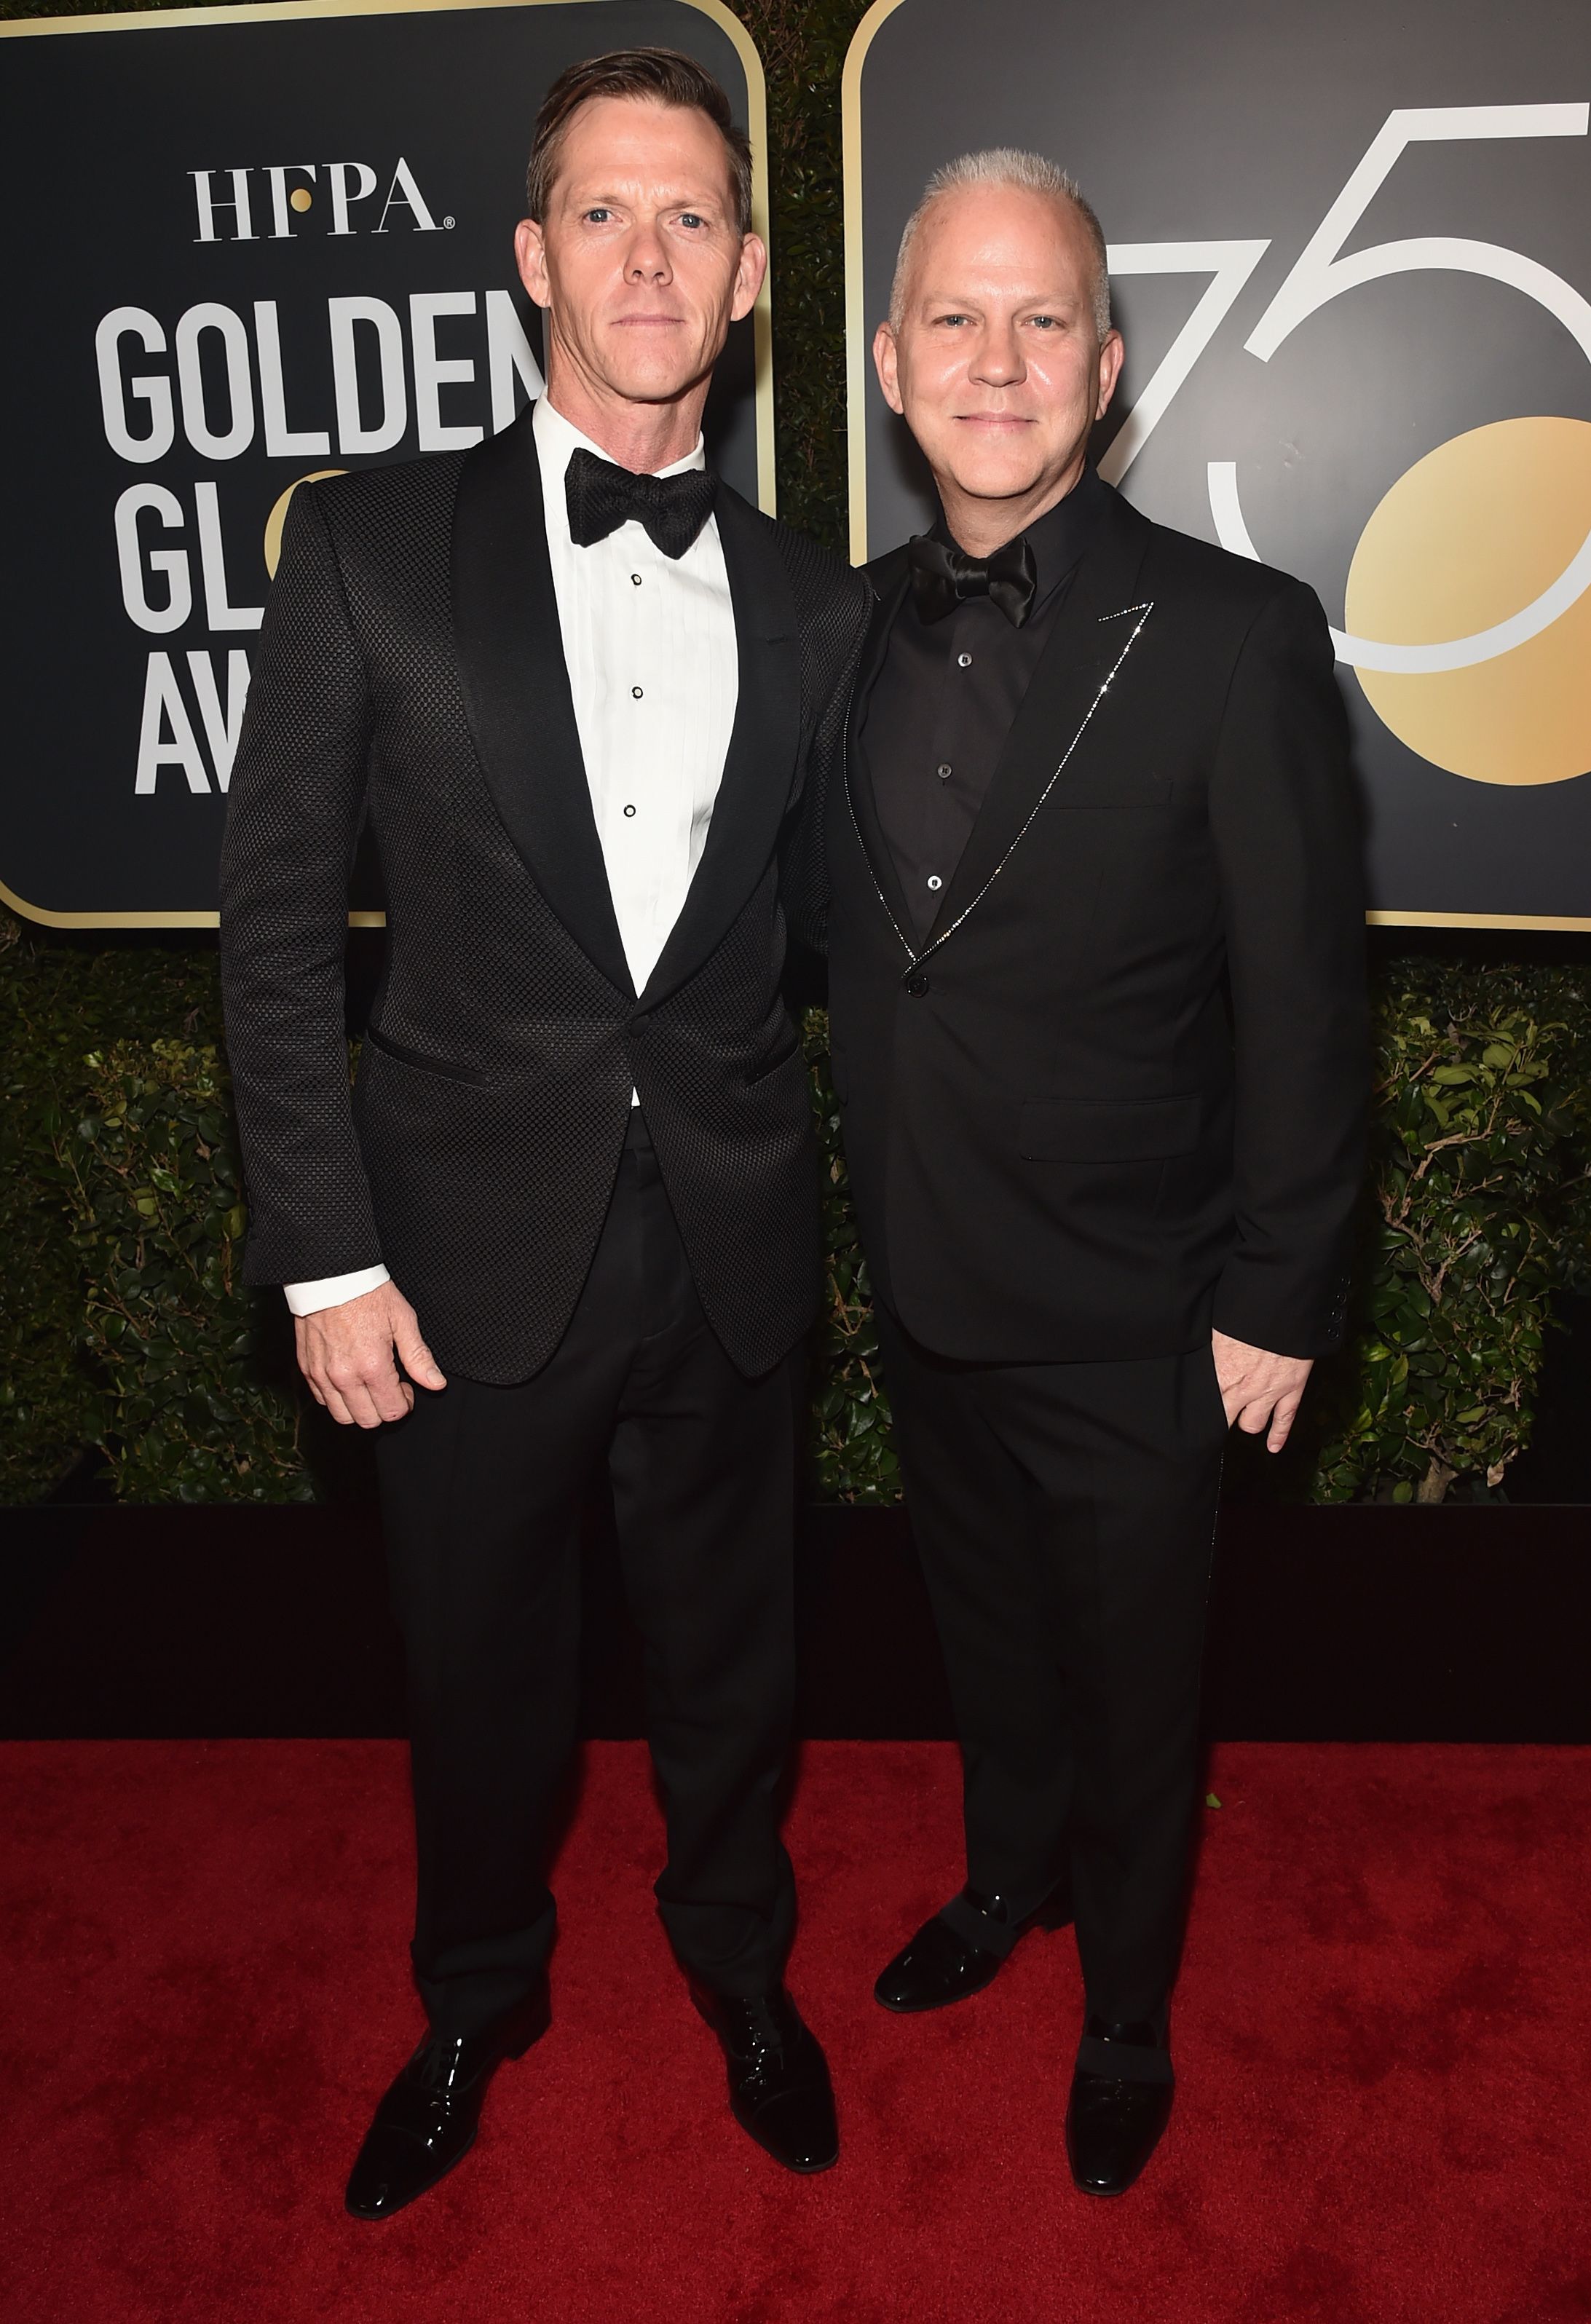 Producer Ryan Murphy and David Miller at the 75th Annual Golden Globe Awards at The Beverly Hilton Hotel on January 7, 2018 | Photo: Getty Images